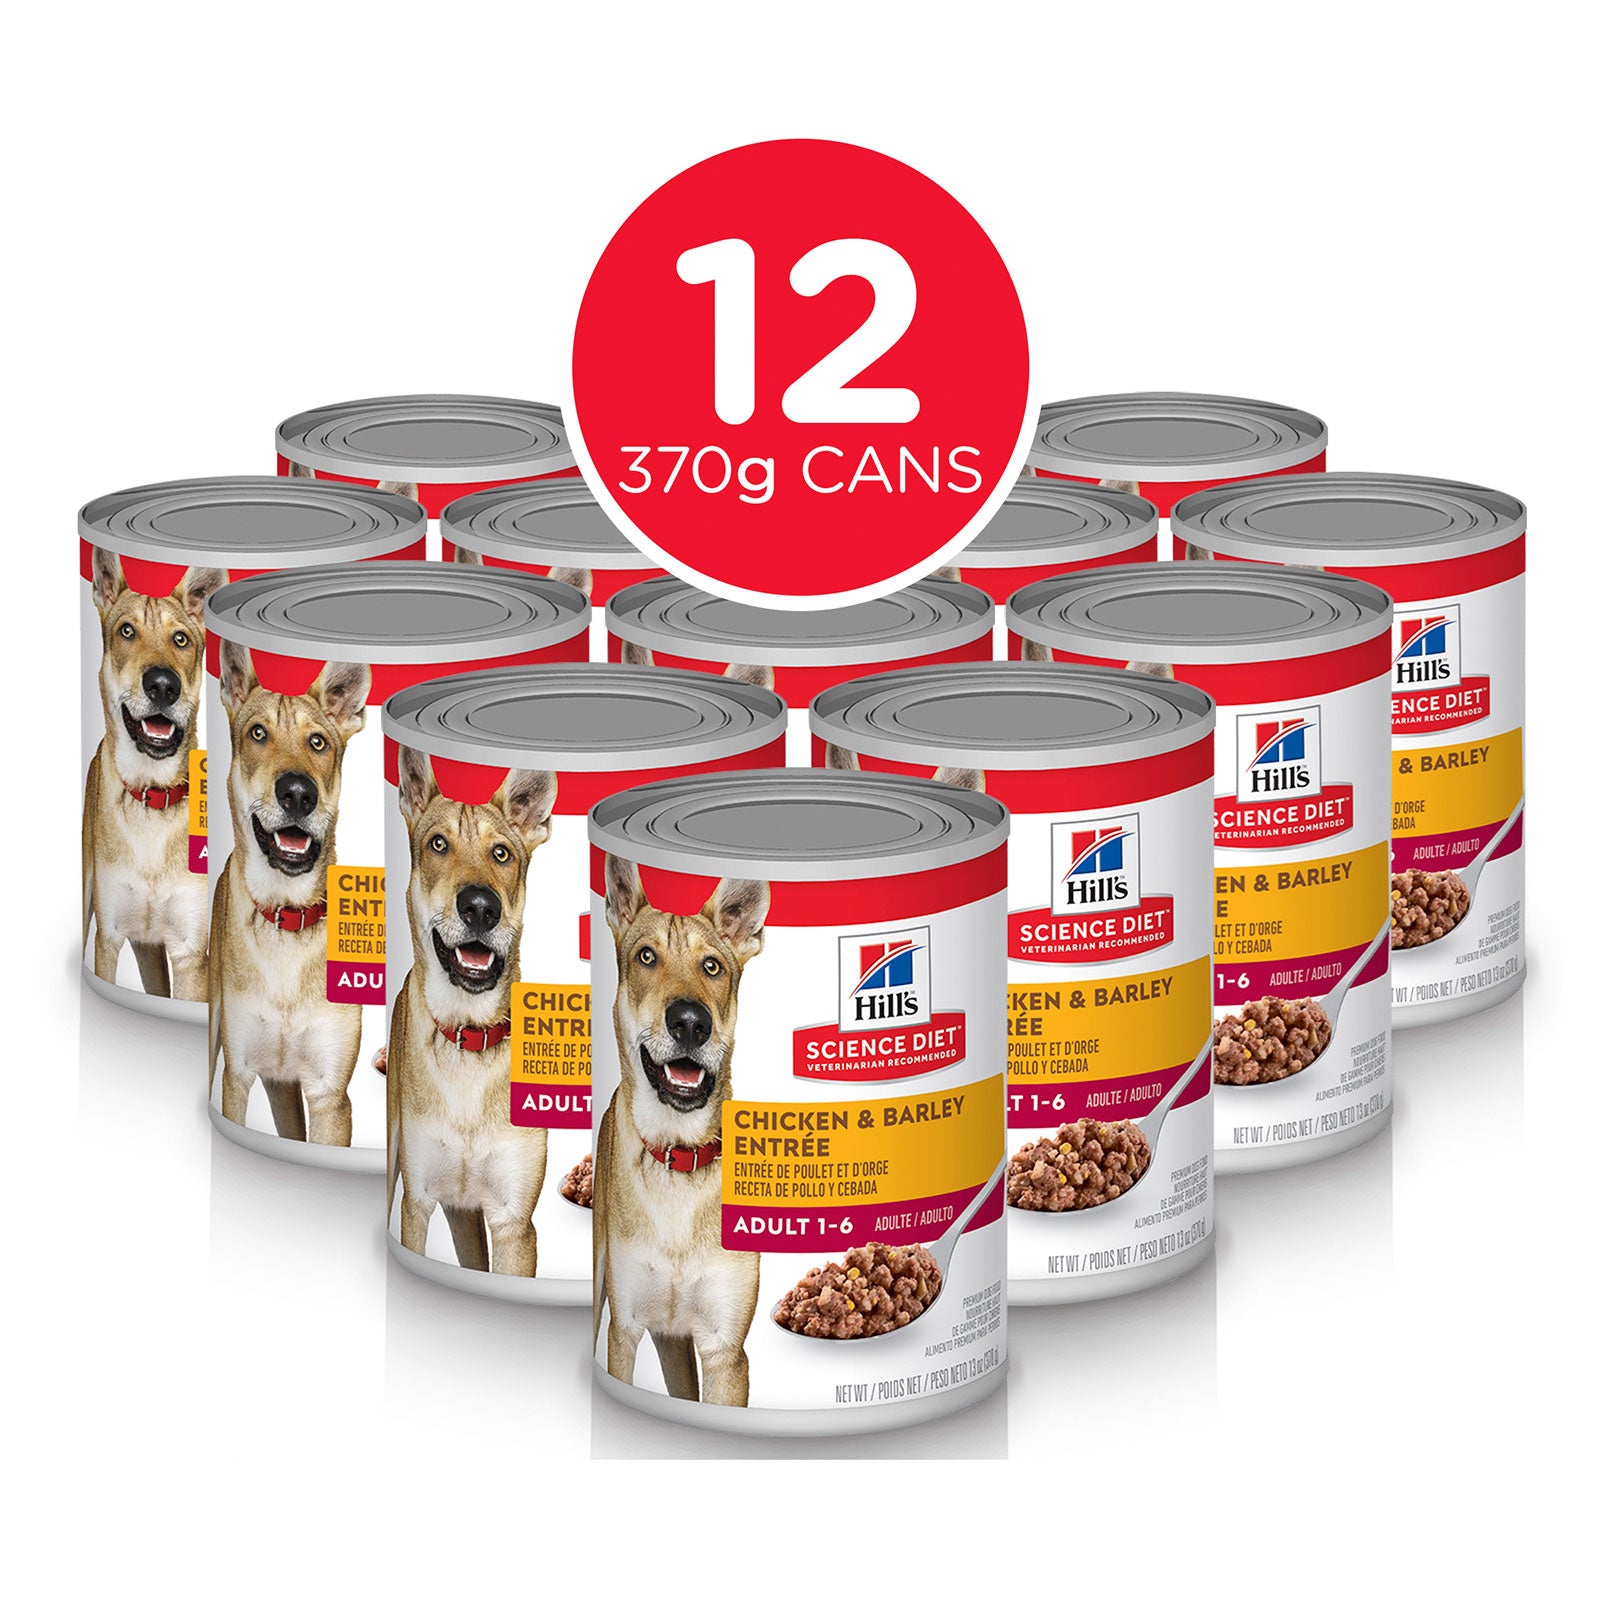 Hill's Science Diet Dog Food Can Adult Chicken & Barley Entrée